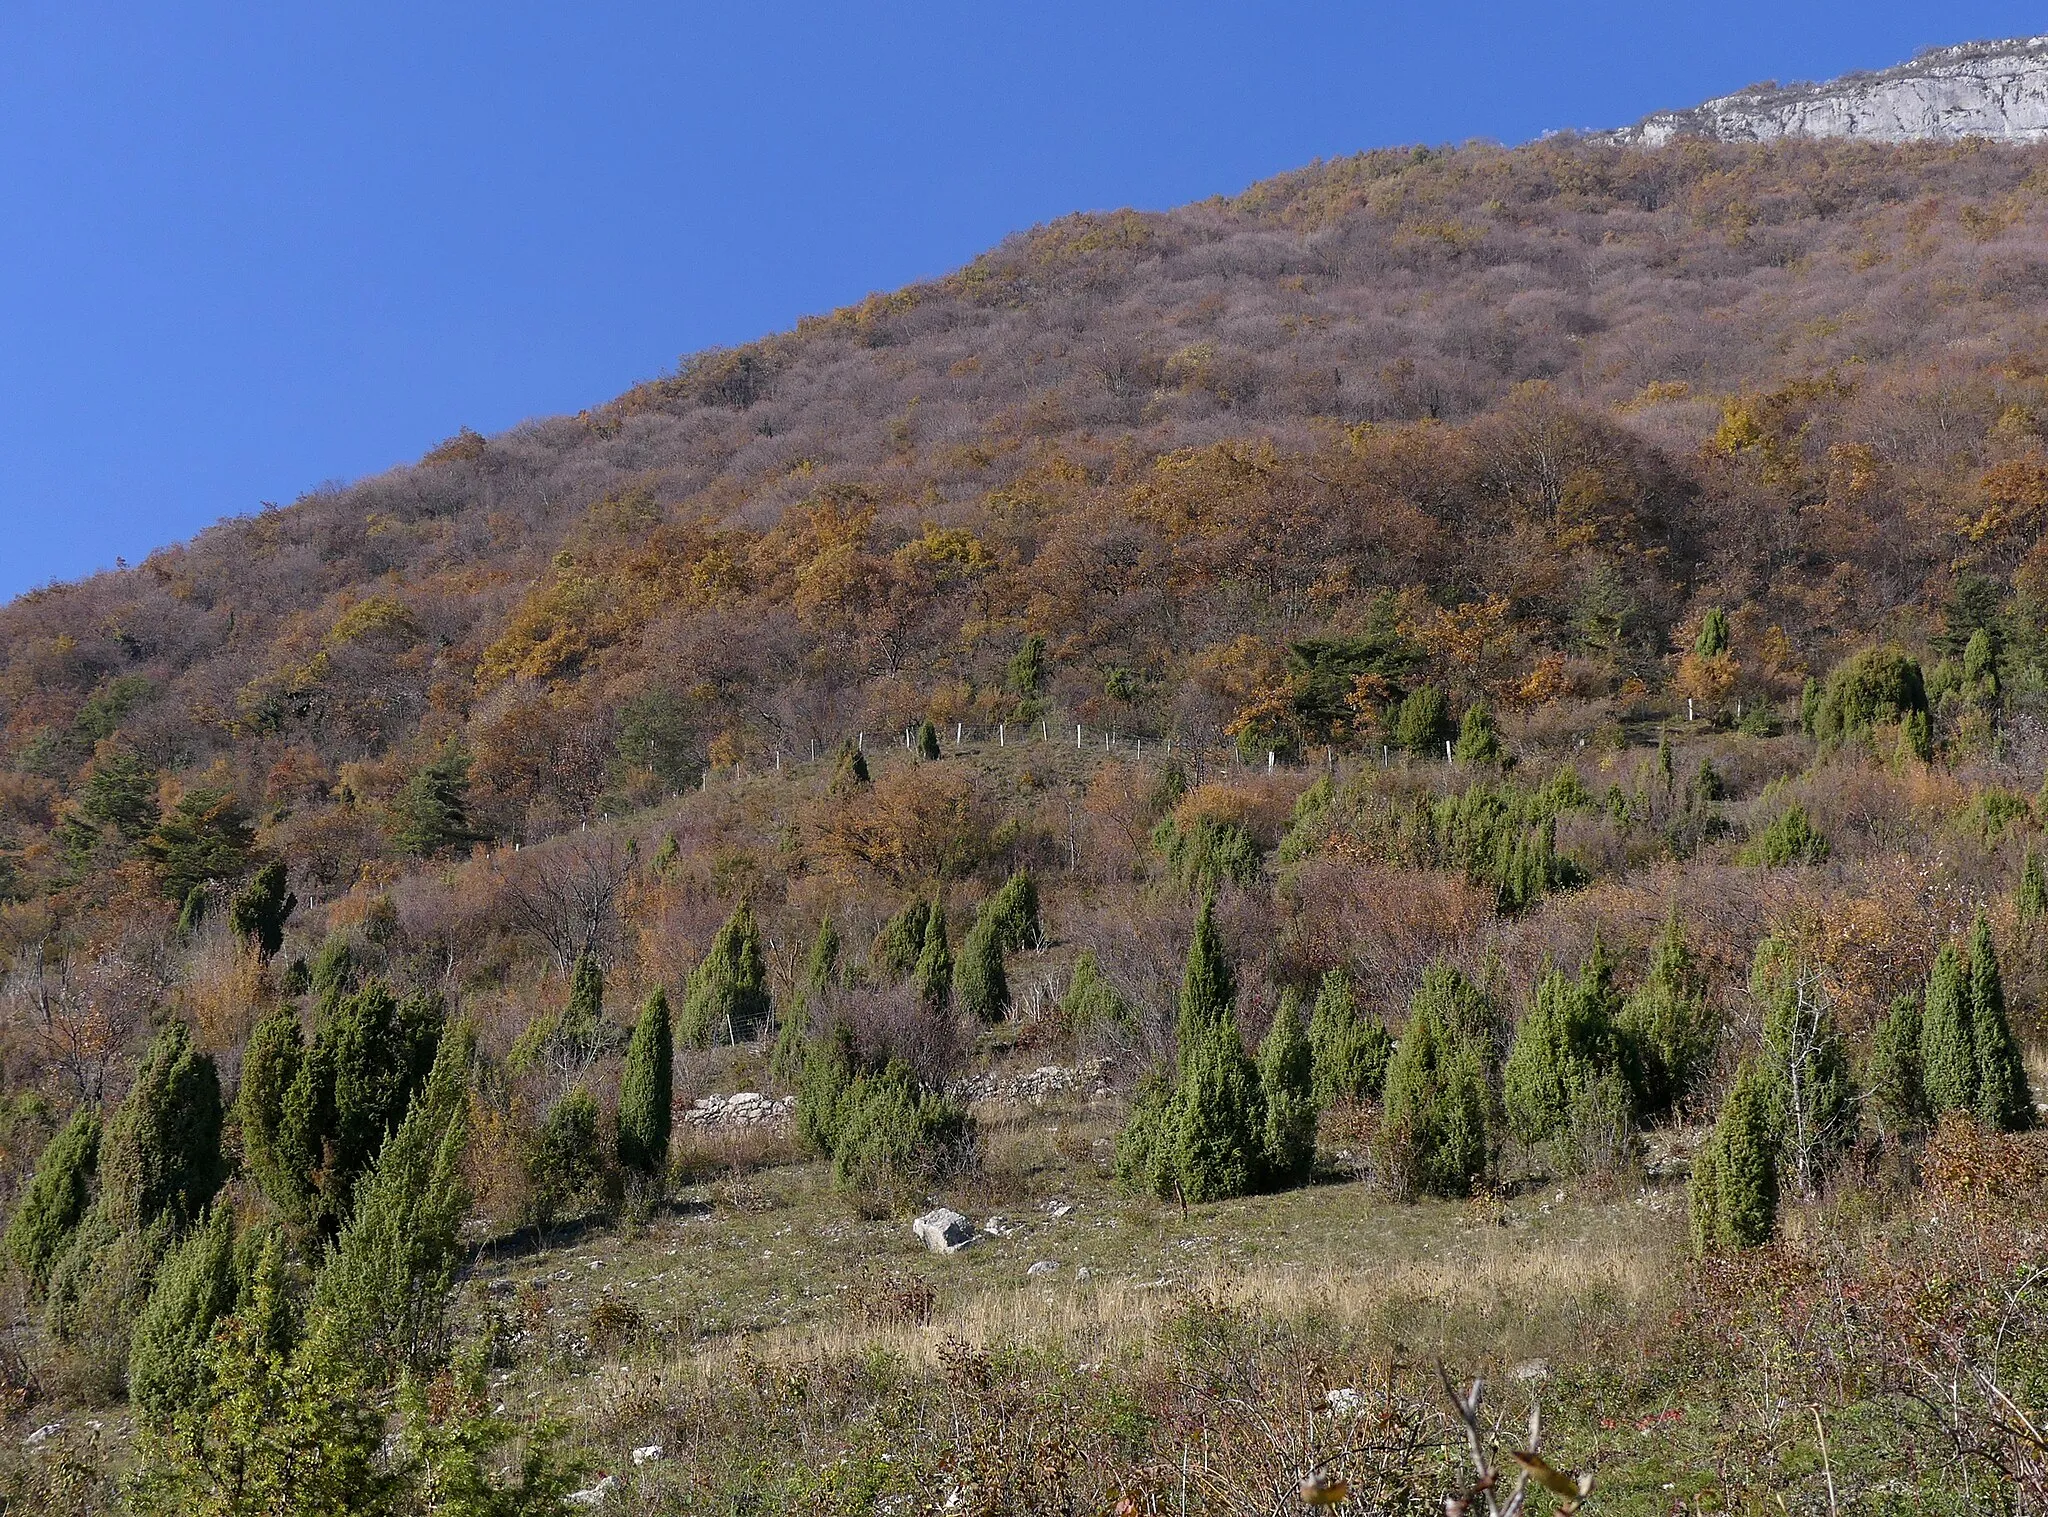 Photo showing: Sight, in autumn, of woodlands on the slopes of Roc de Tormery mountain, overhanging Montmélian and Combe de Savoie valley, in Savoie, France.